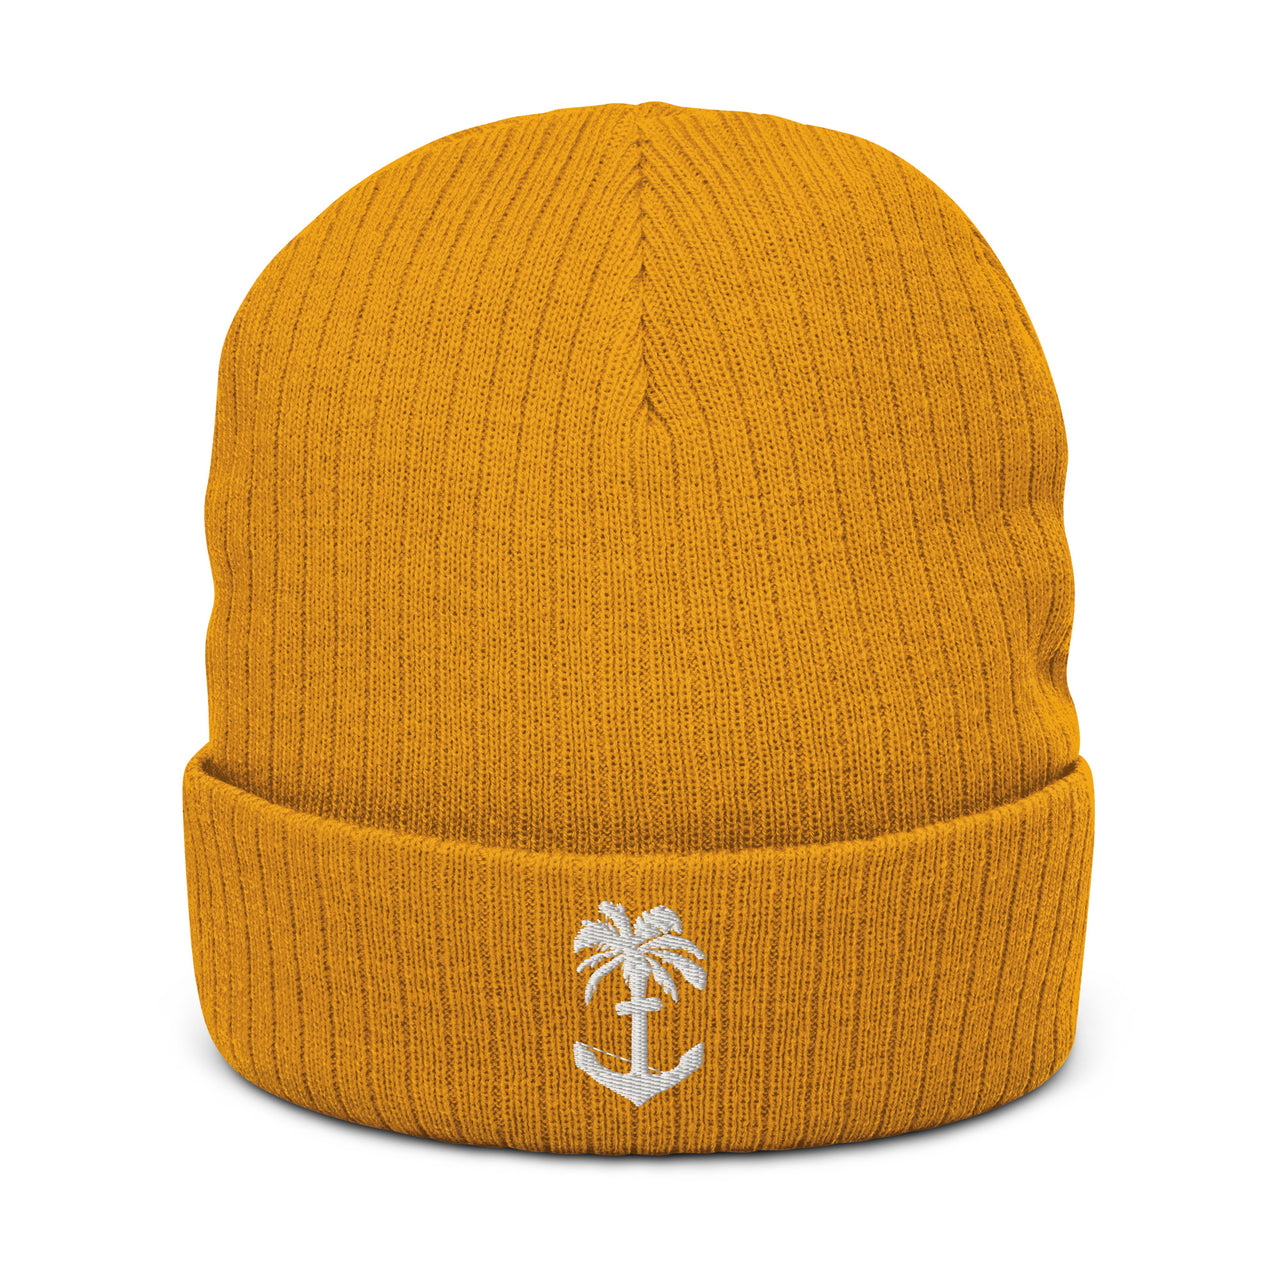 Crewtopia- Simple logo- Embroidered Ribbed knit beanie